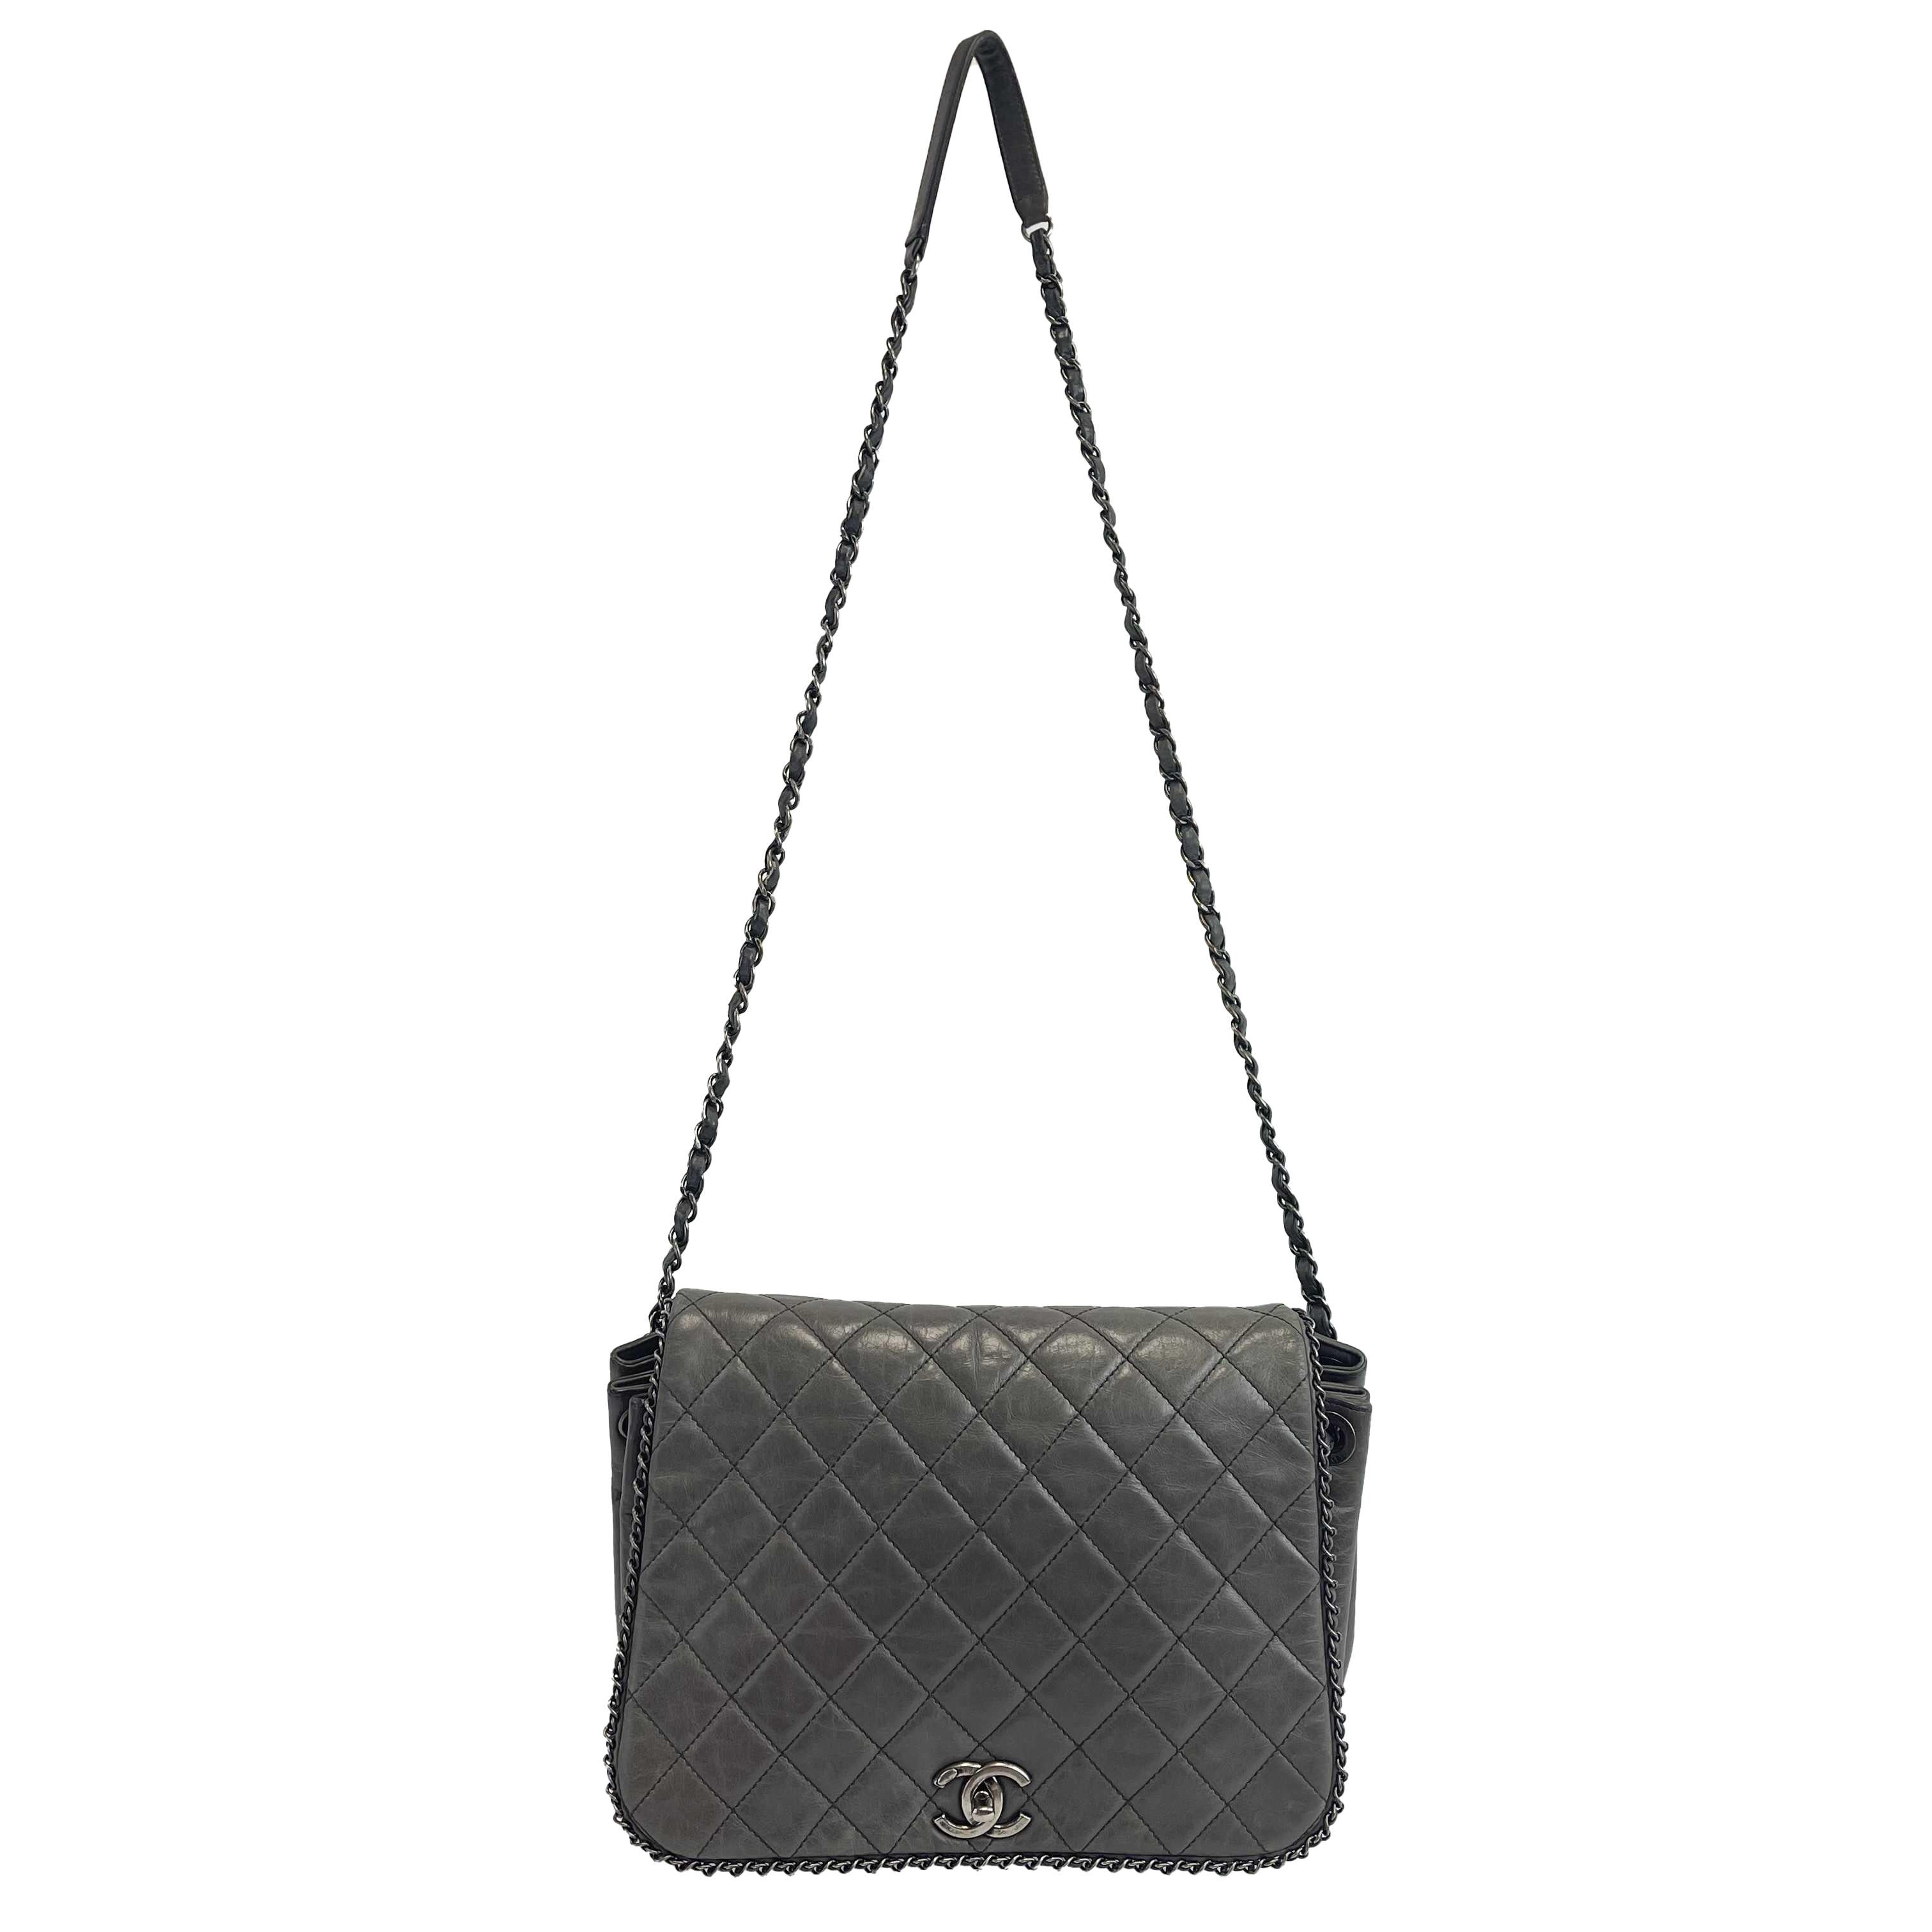 CHANEL - Calfskin Quilted Large CC Enchained Accordion - Gray Shoulder Bag For Sale 6